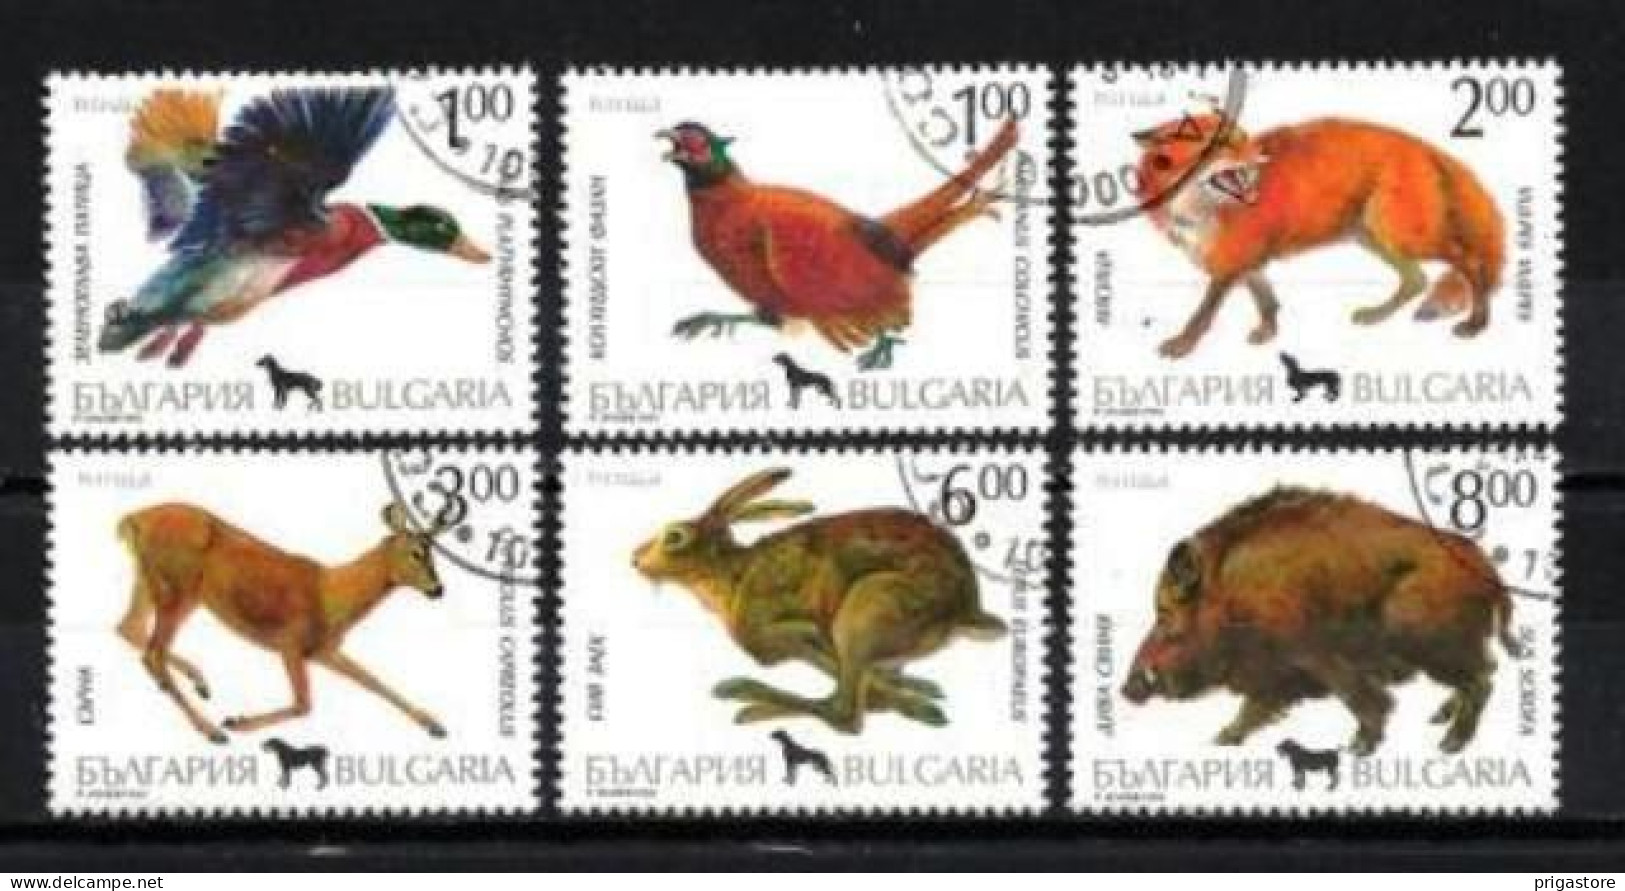 Bulgarie 1993 Animaux Gibier (84) Yvert N° 3535 à 3540 Oblitéré Used - Used Stamps